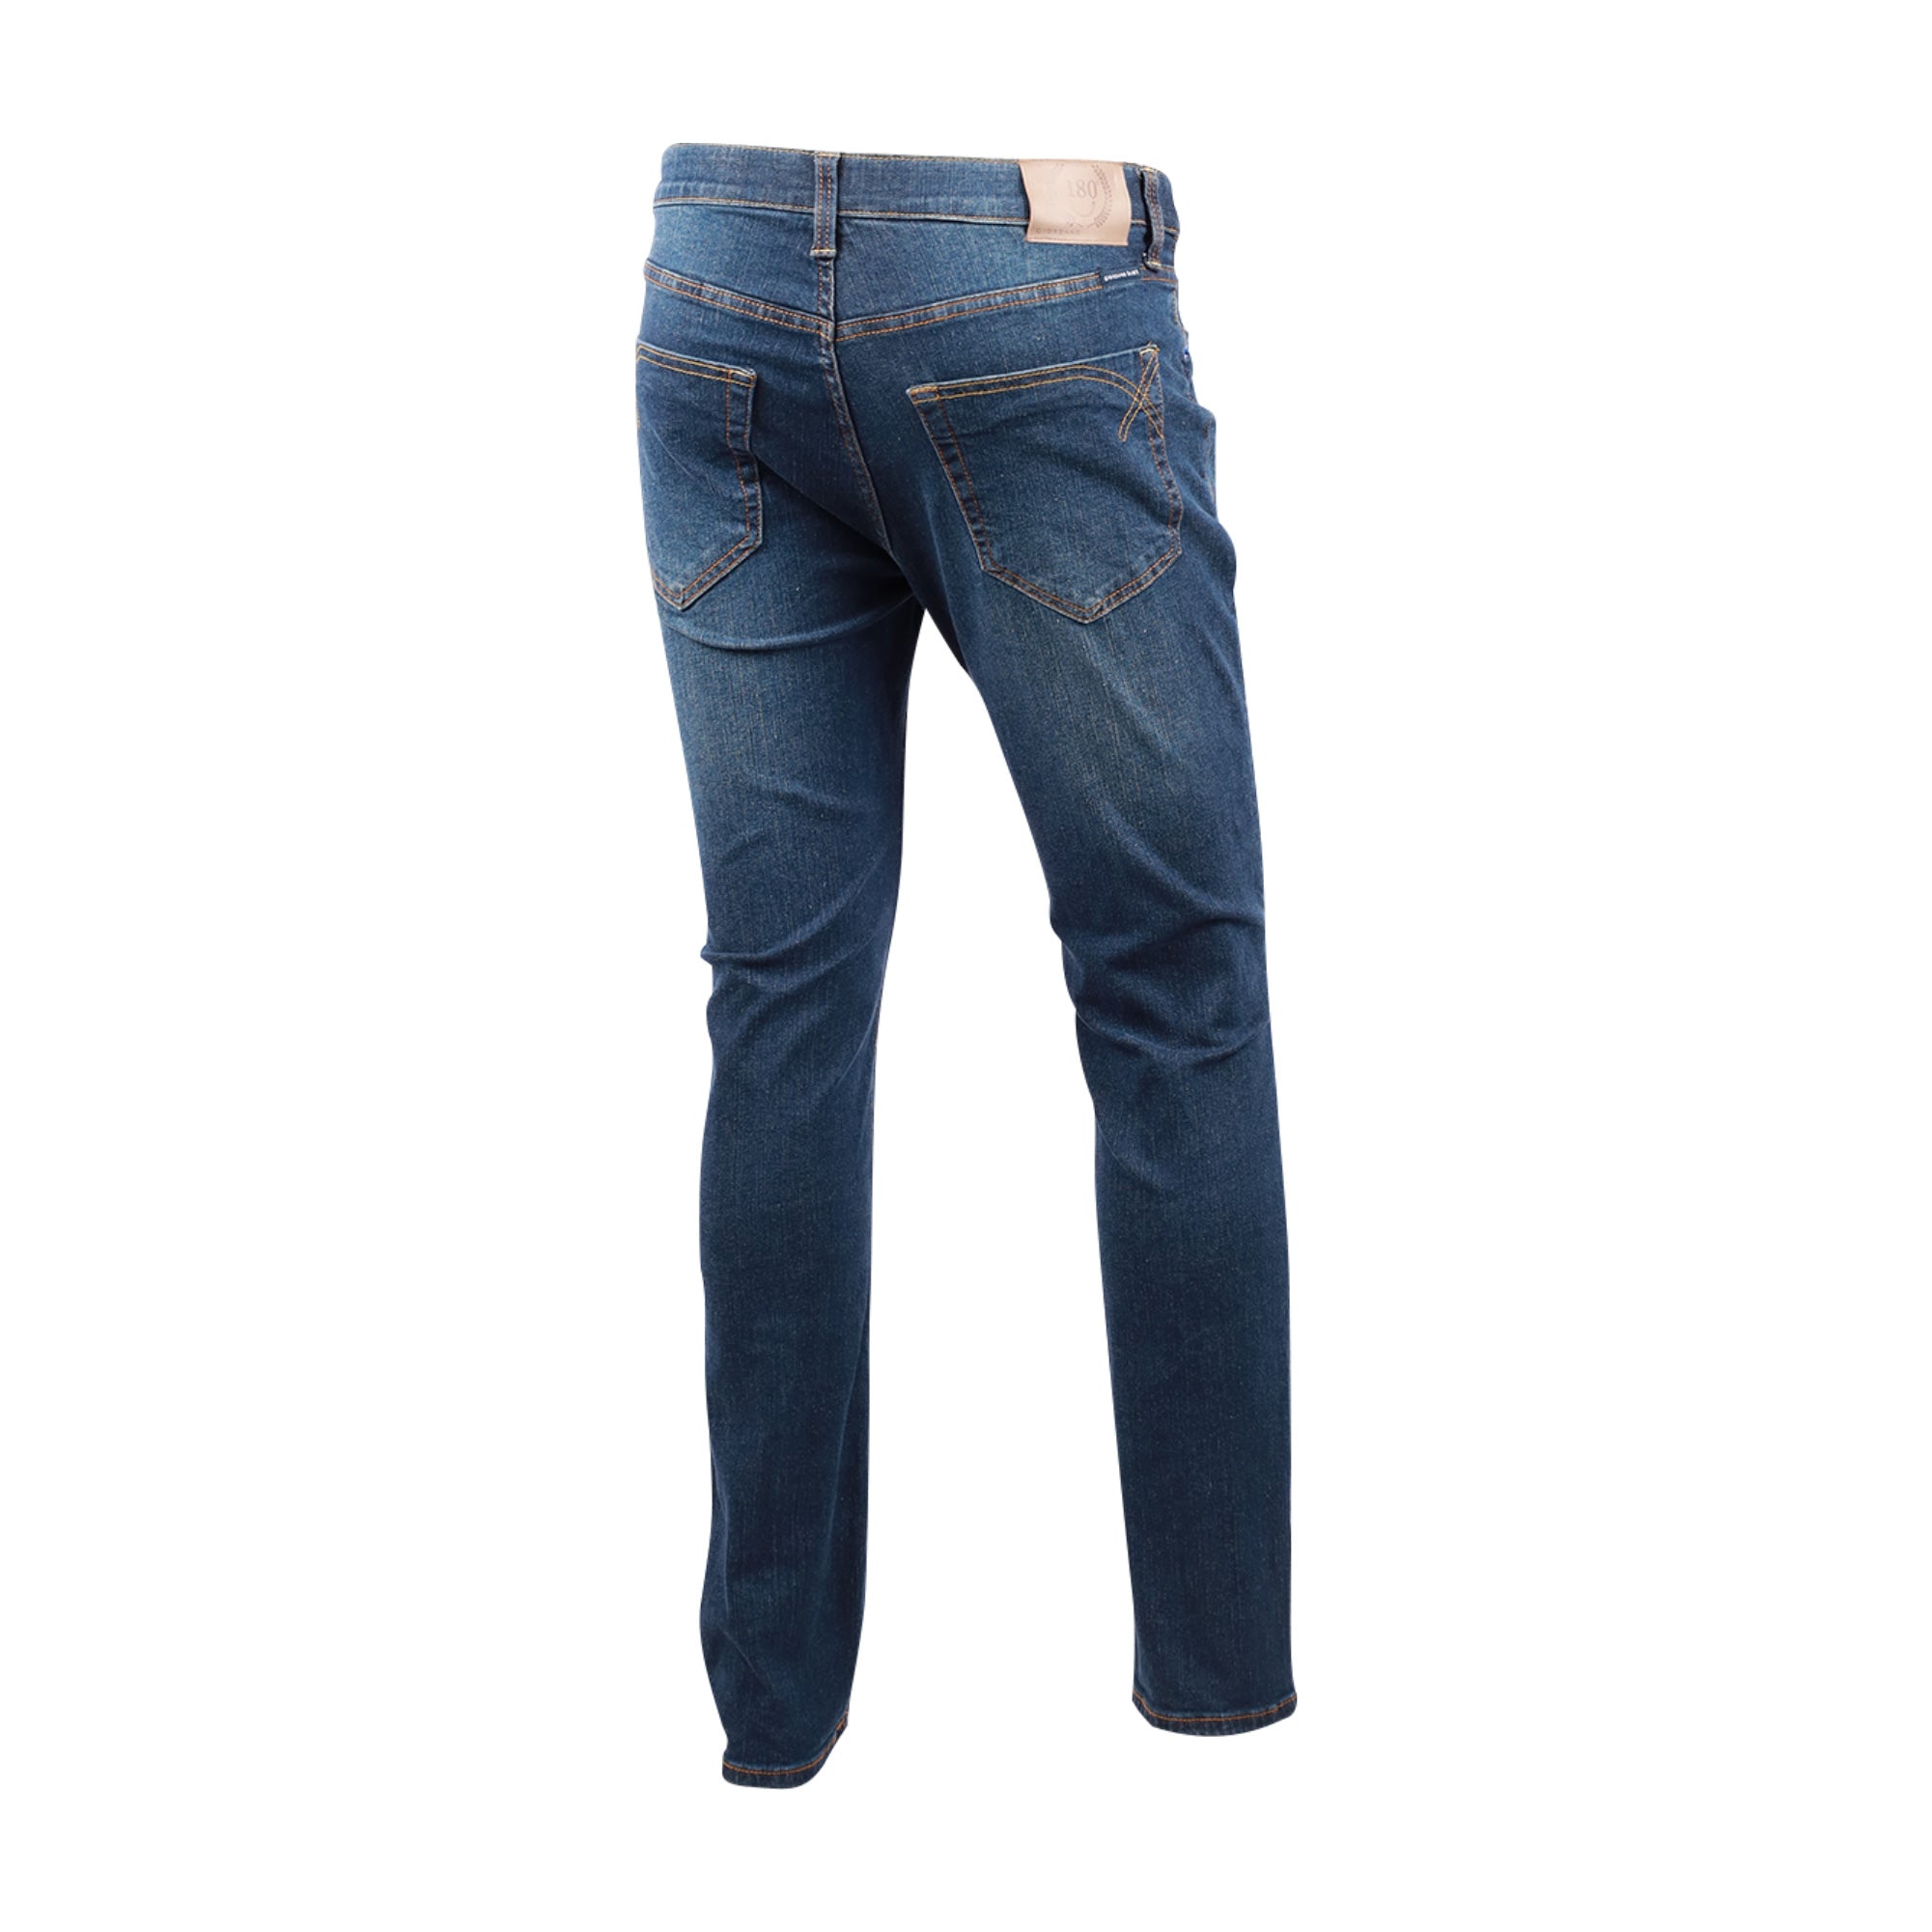 Men's Low Rise Skinny Tapered Jean Pants (180° Expandable Waistband)